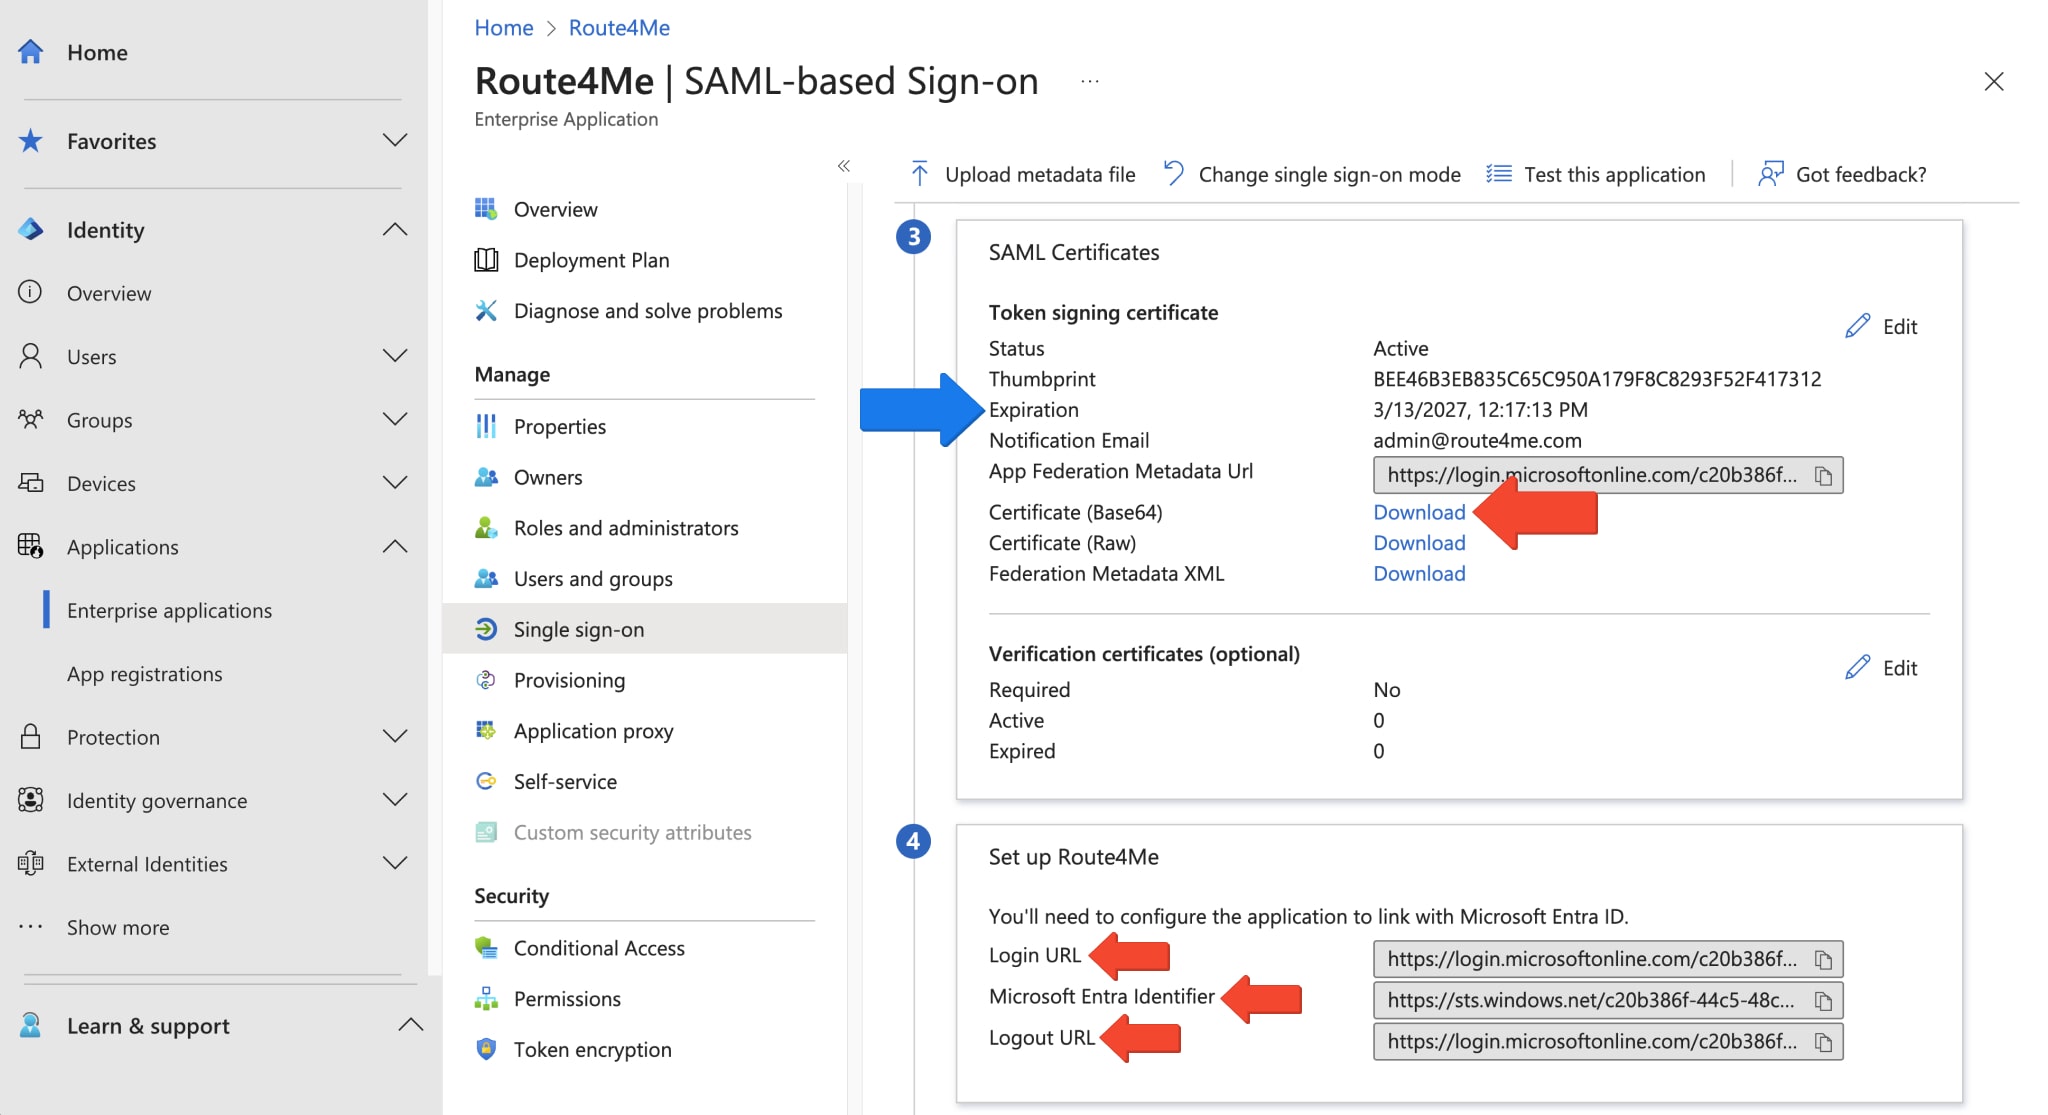 Entra ID Azure will create the following entries for you in the SAML Blade: Login URL, Microsoft Entra Identifier, Logout URL. Record these values and download the SAML Certificate.